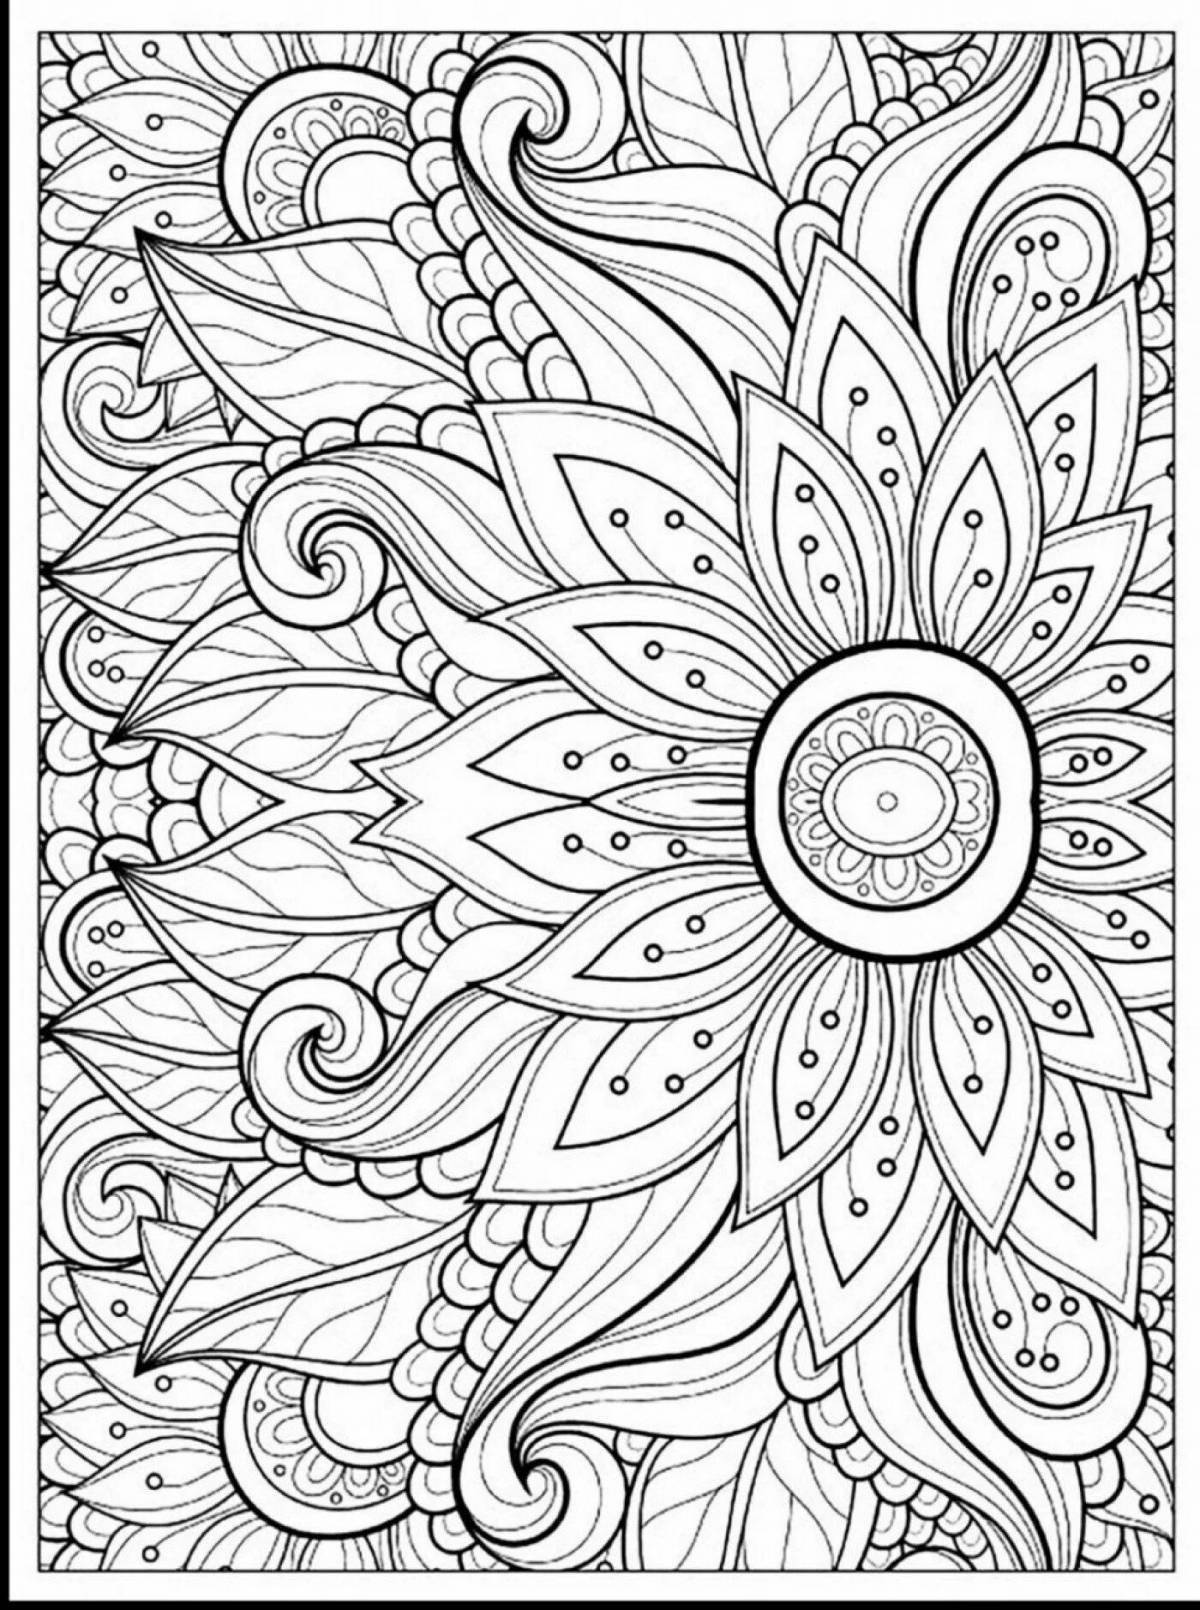 Great coloring book for kids